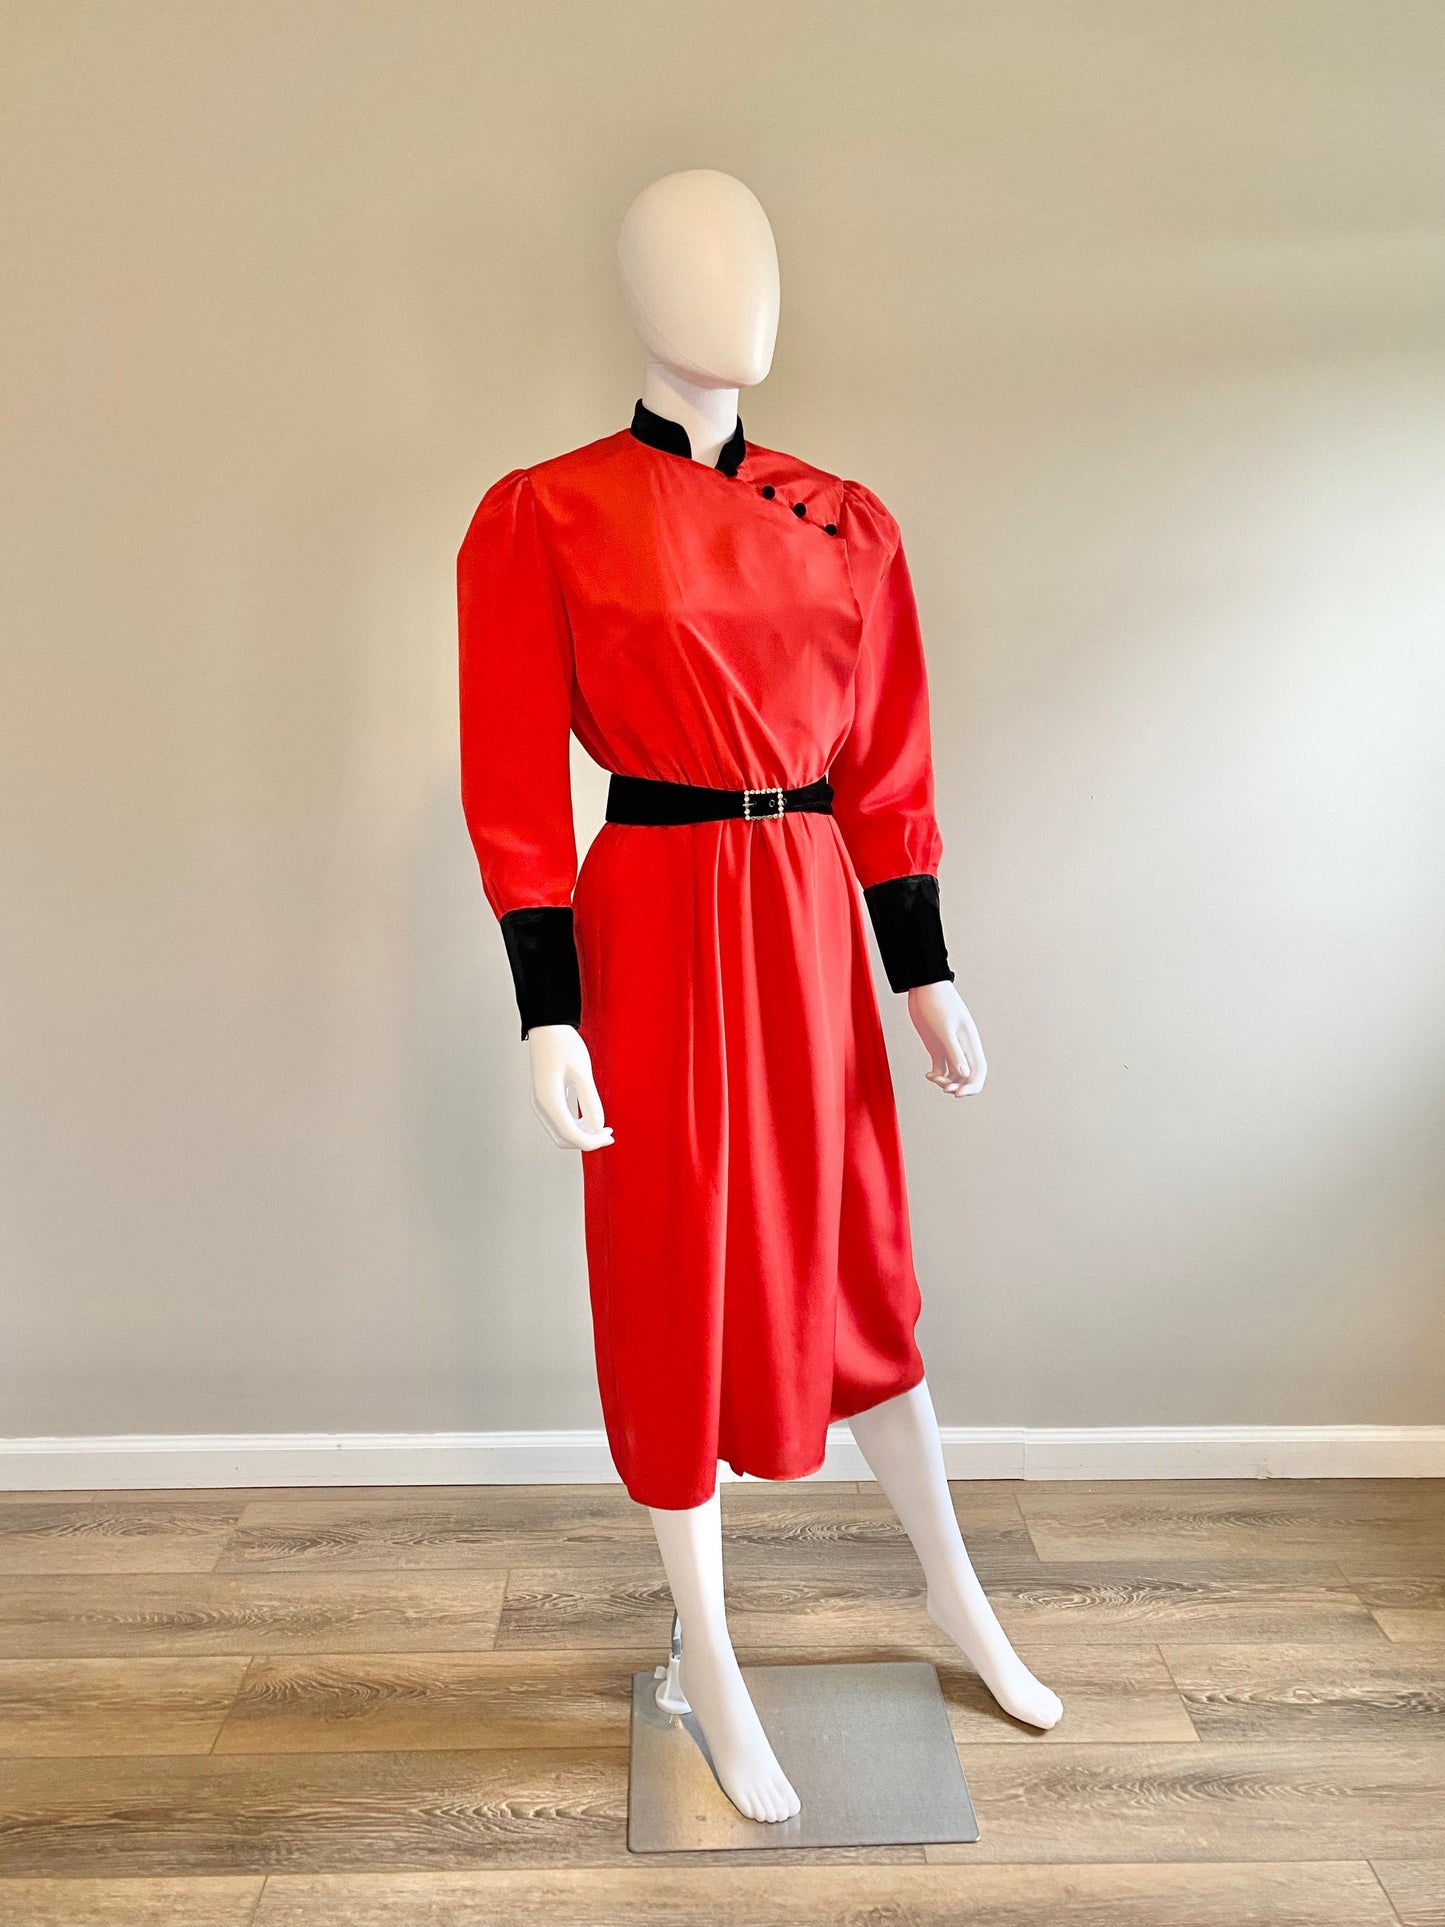 Vintage 1980s Red and Black Holiday Dress / 80s puff sleeve party dress / 1980s does 1940s dress / Size small